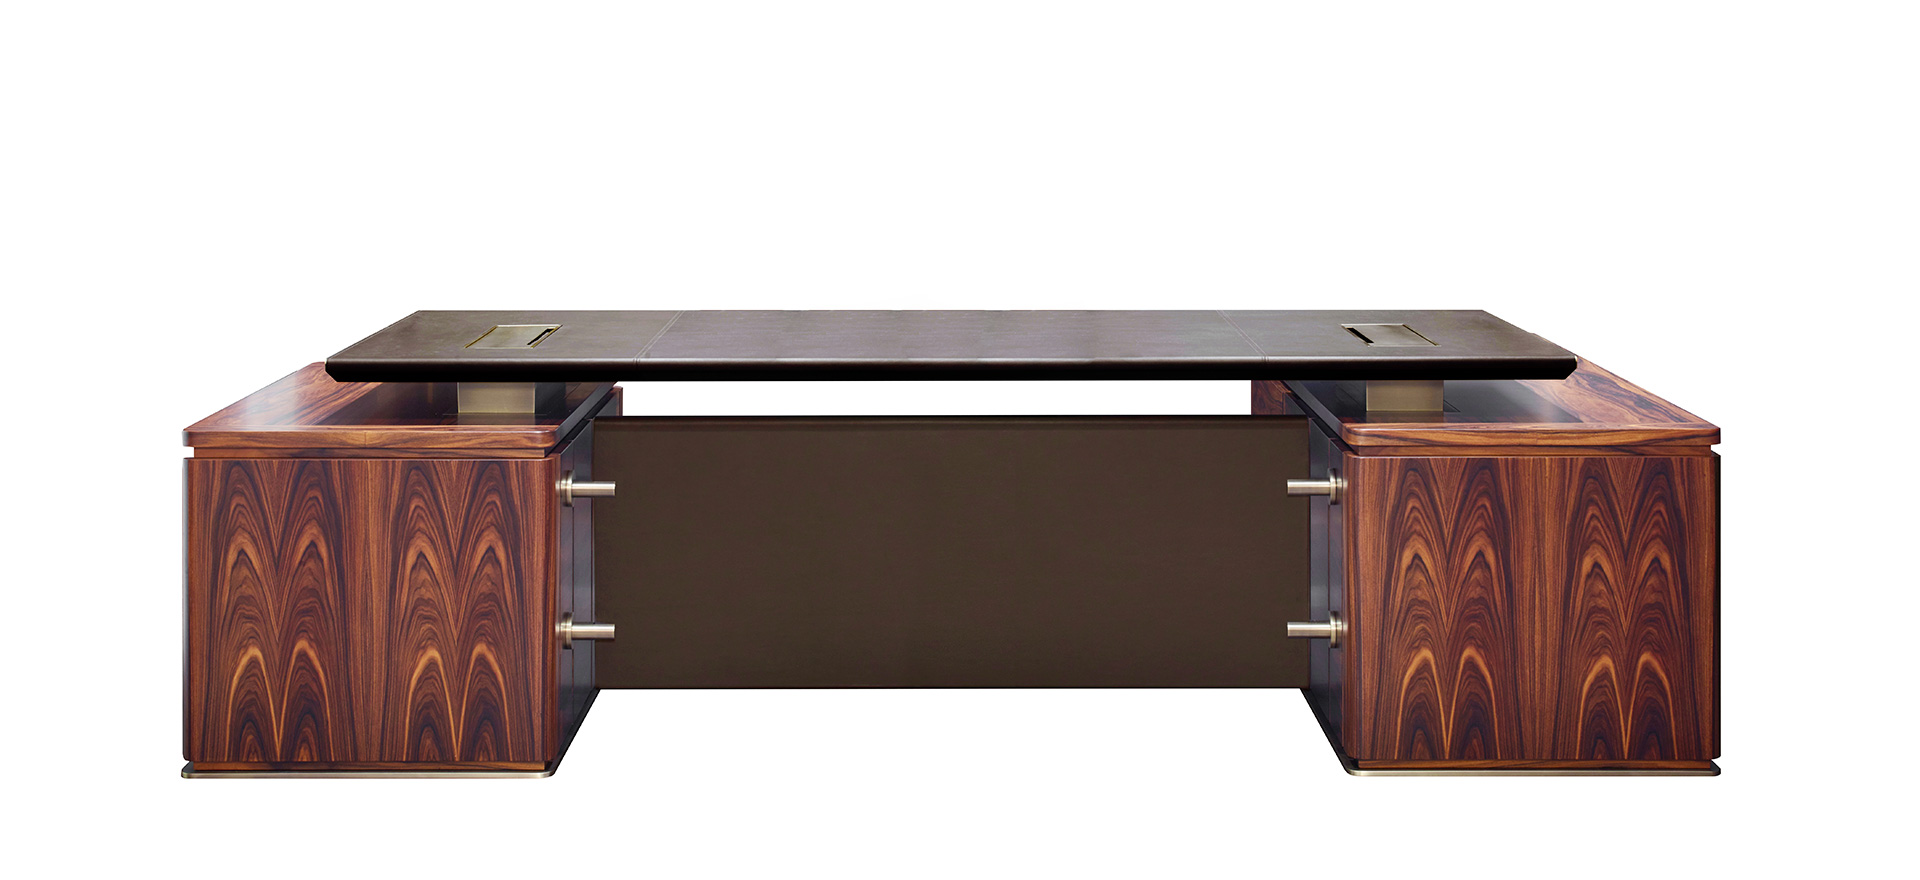 /mediaAu%20Bout%20de%20la%20Nuit%20is%20a%20wooden%20writing%20desk%20with%20base%20and%20details%20in%20bronze%20from%20the%20Promemoria's%20catalogue,%20that%20has%20been%20designed%20by%20Davide%20Sozzi%20in%202016%20|%20Promemoria